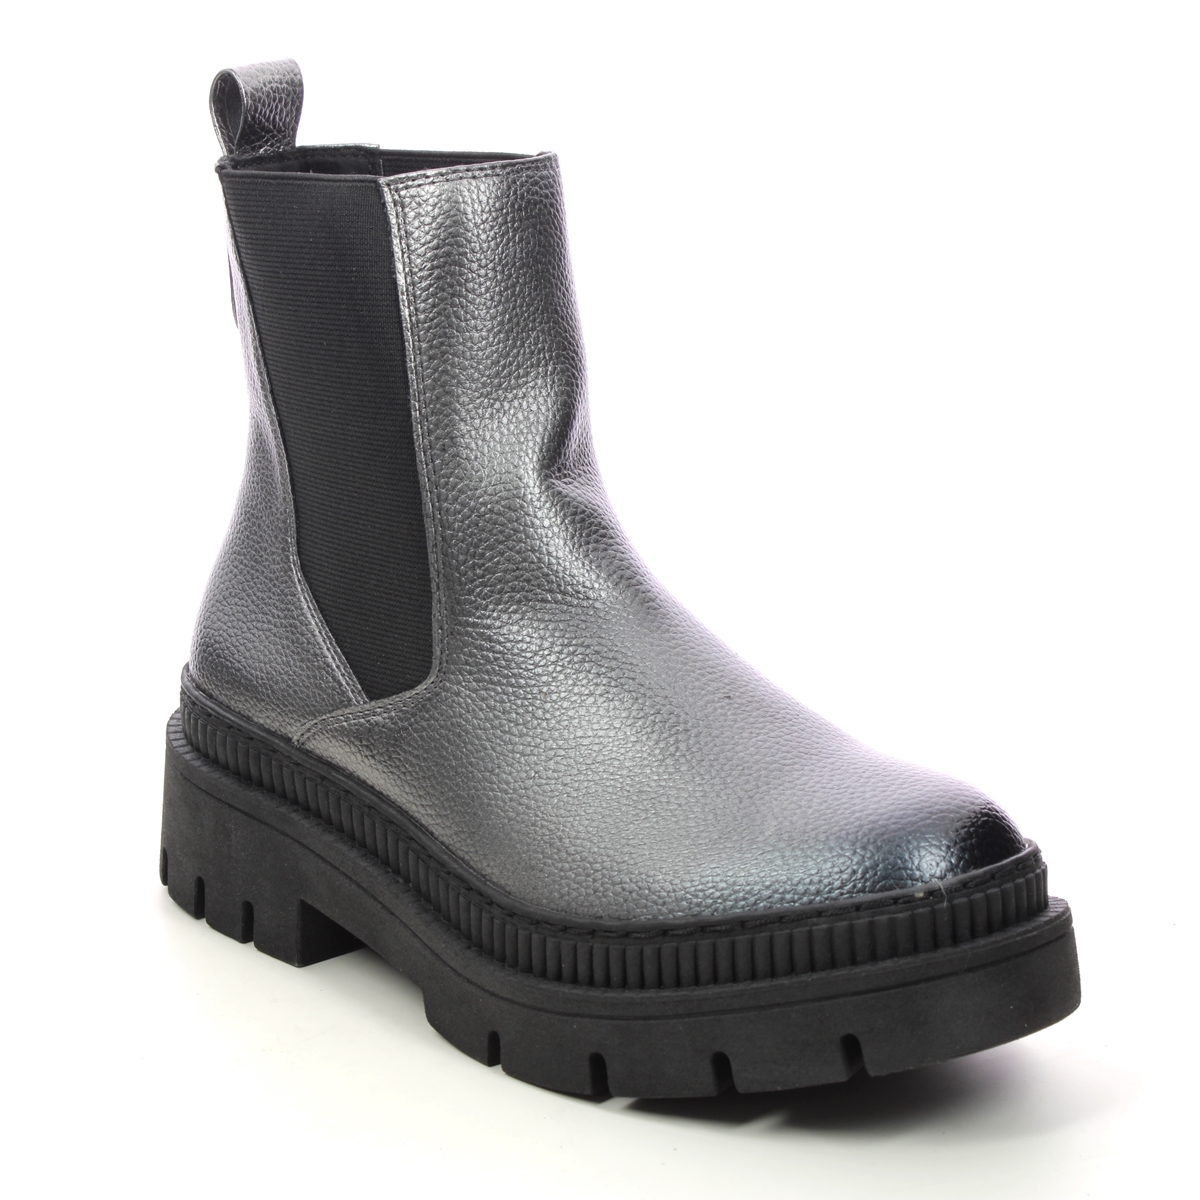 Marco Tozzi Rostra Chelsea Pewter Womens Chelsea Boots 25822-41-915 In Size 40 In Plain Pewter